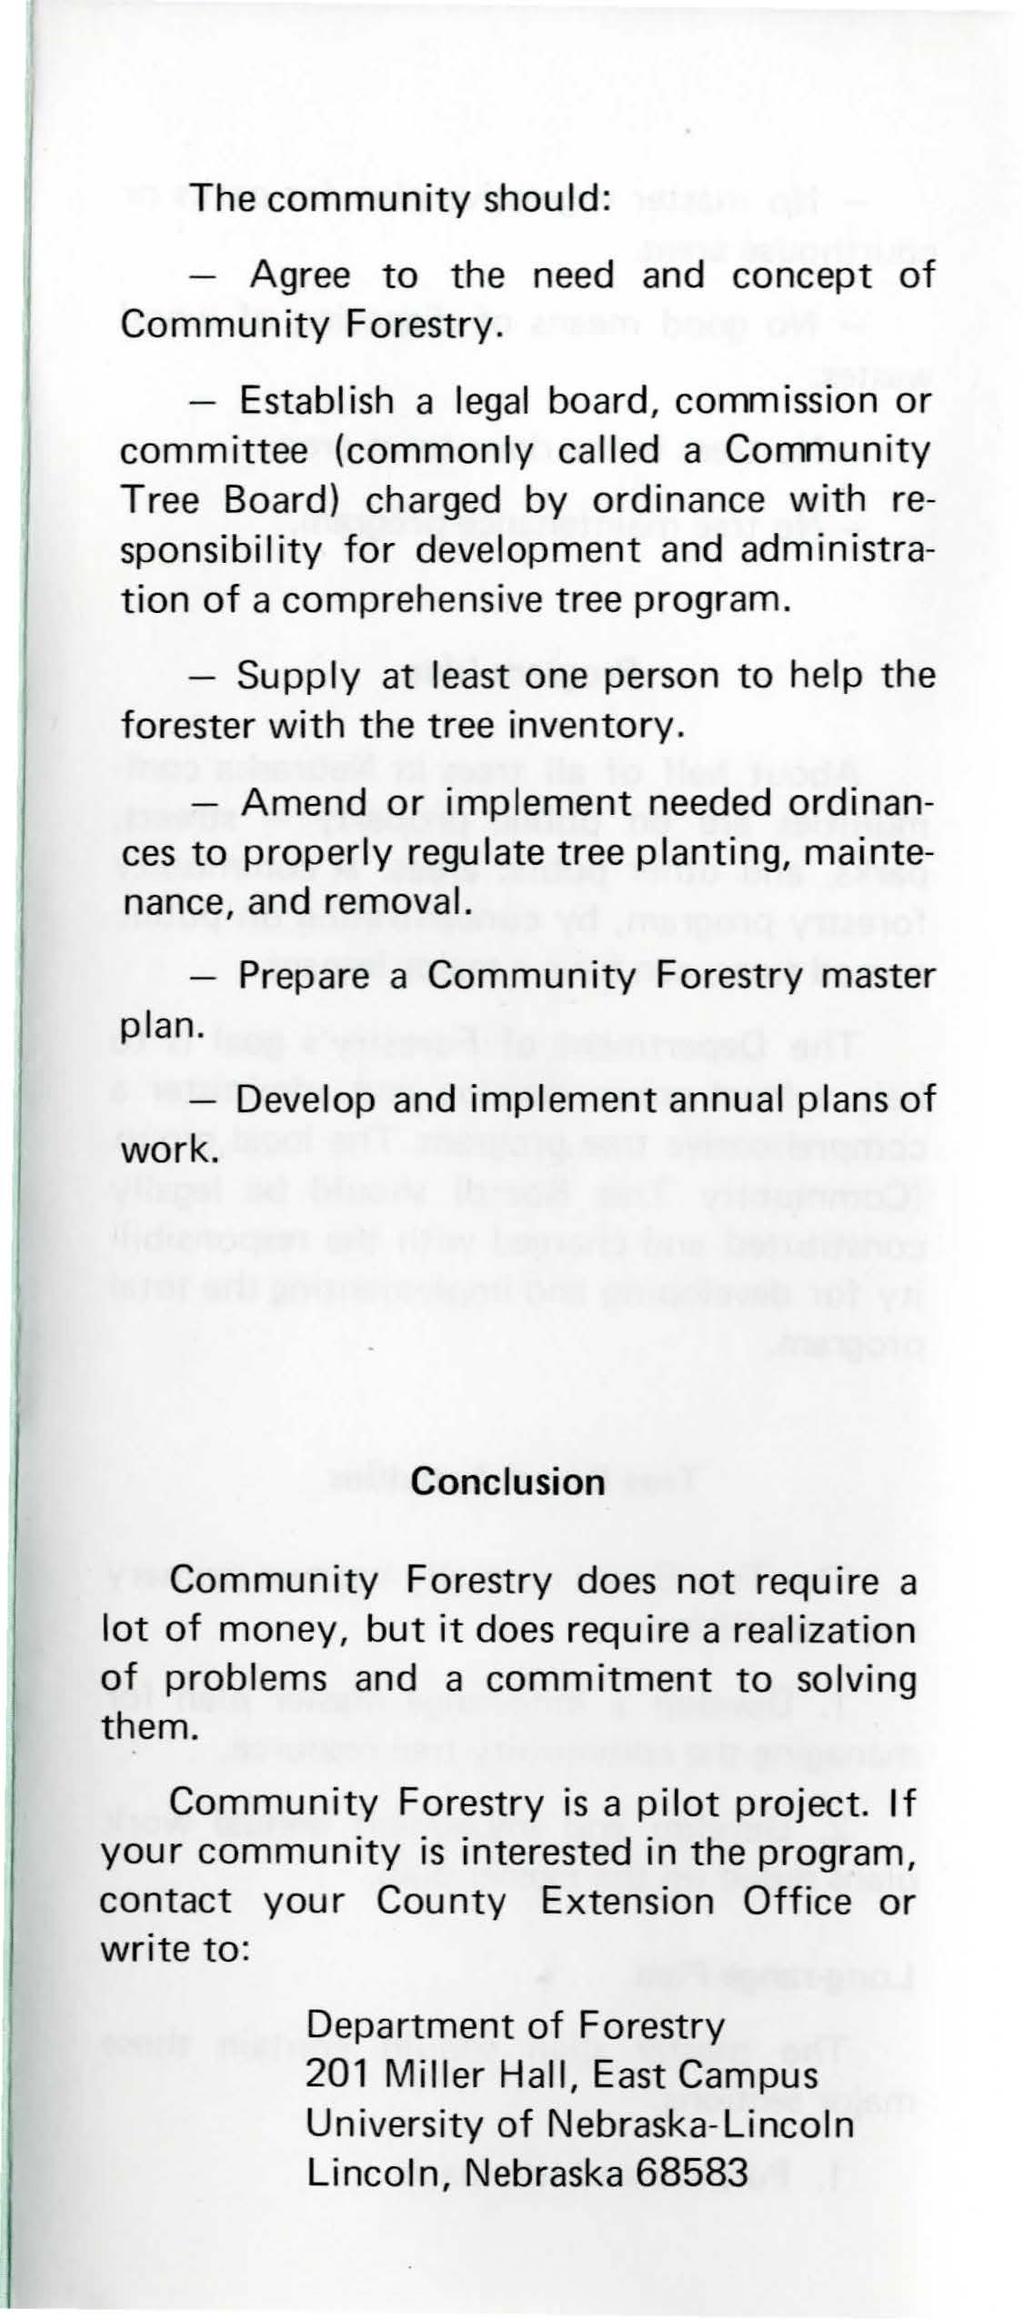 The community should: - Agree to the need and concept of Community Forestry.